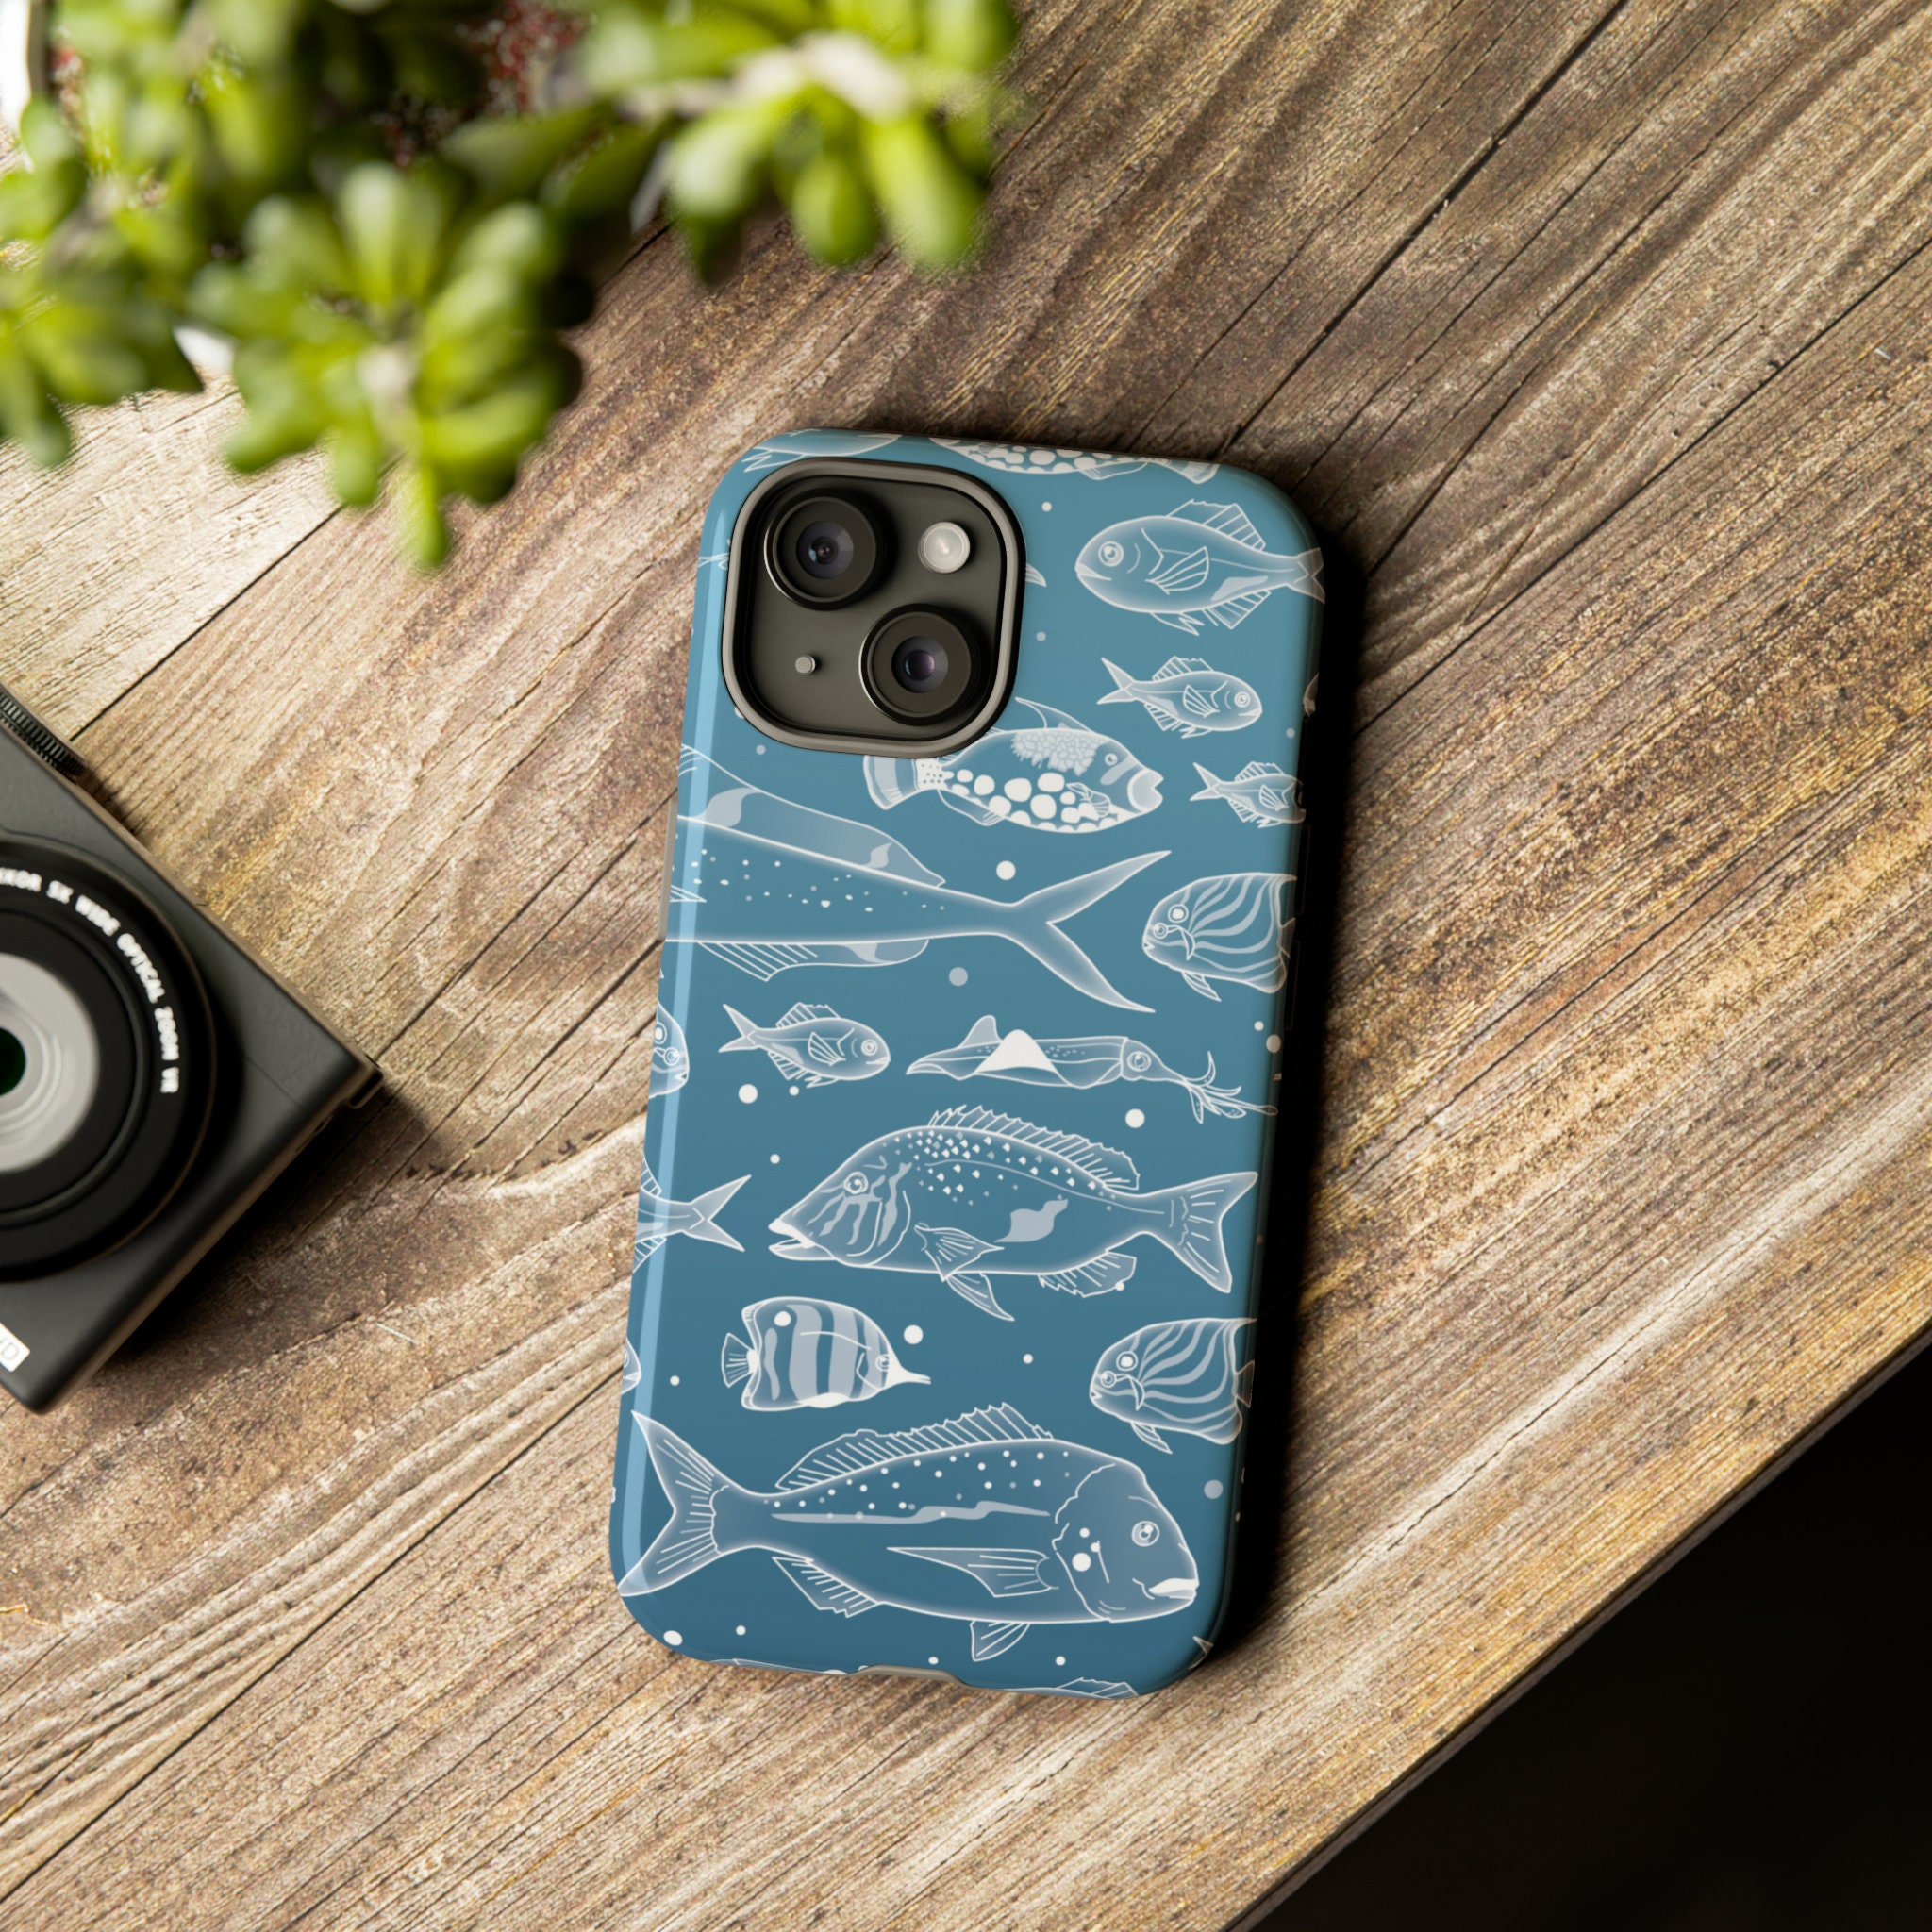  iPhone SE (2020) / 7 / 8 I'm Hooked On - Fisher Fisherman  Salmon Fishing Case : Cell Phones & Accessories